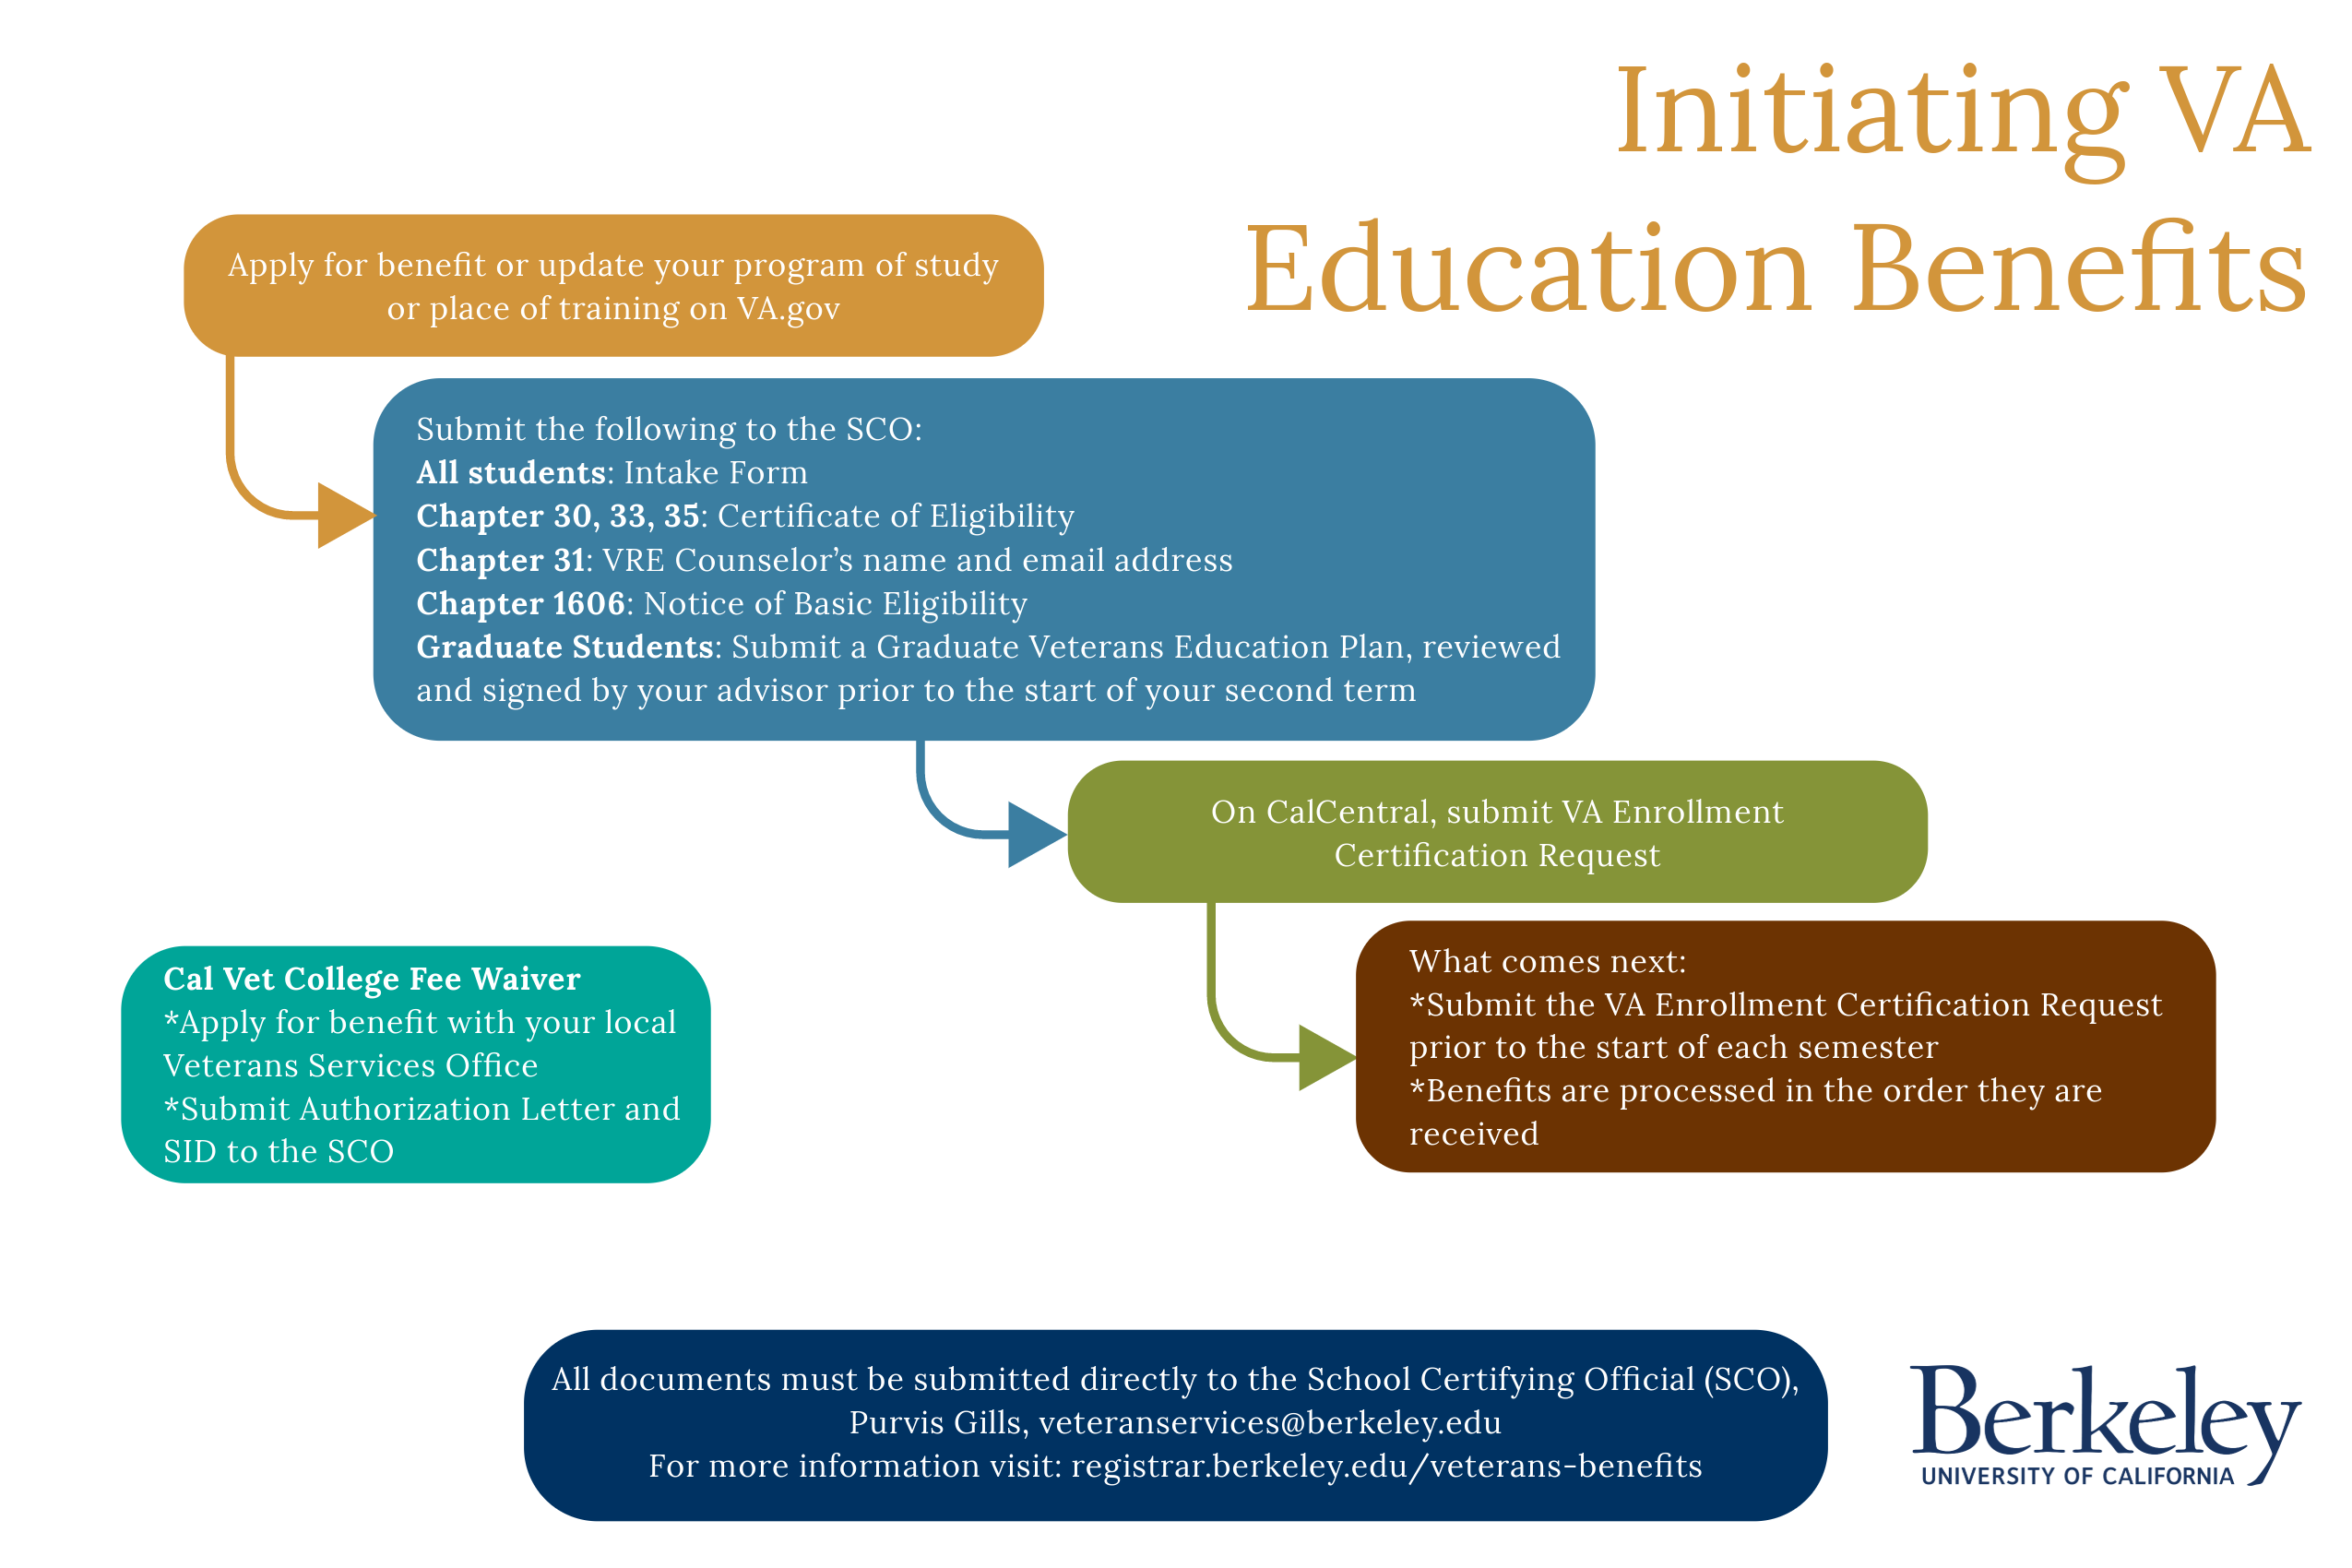 Flow chart showing steps of initiating VA Education Benefits at UC Berkeley.